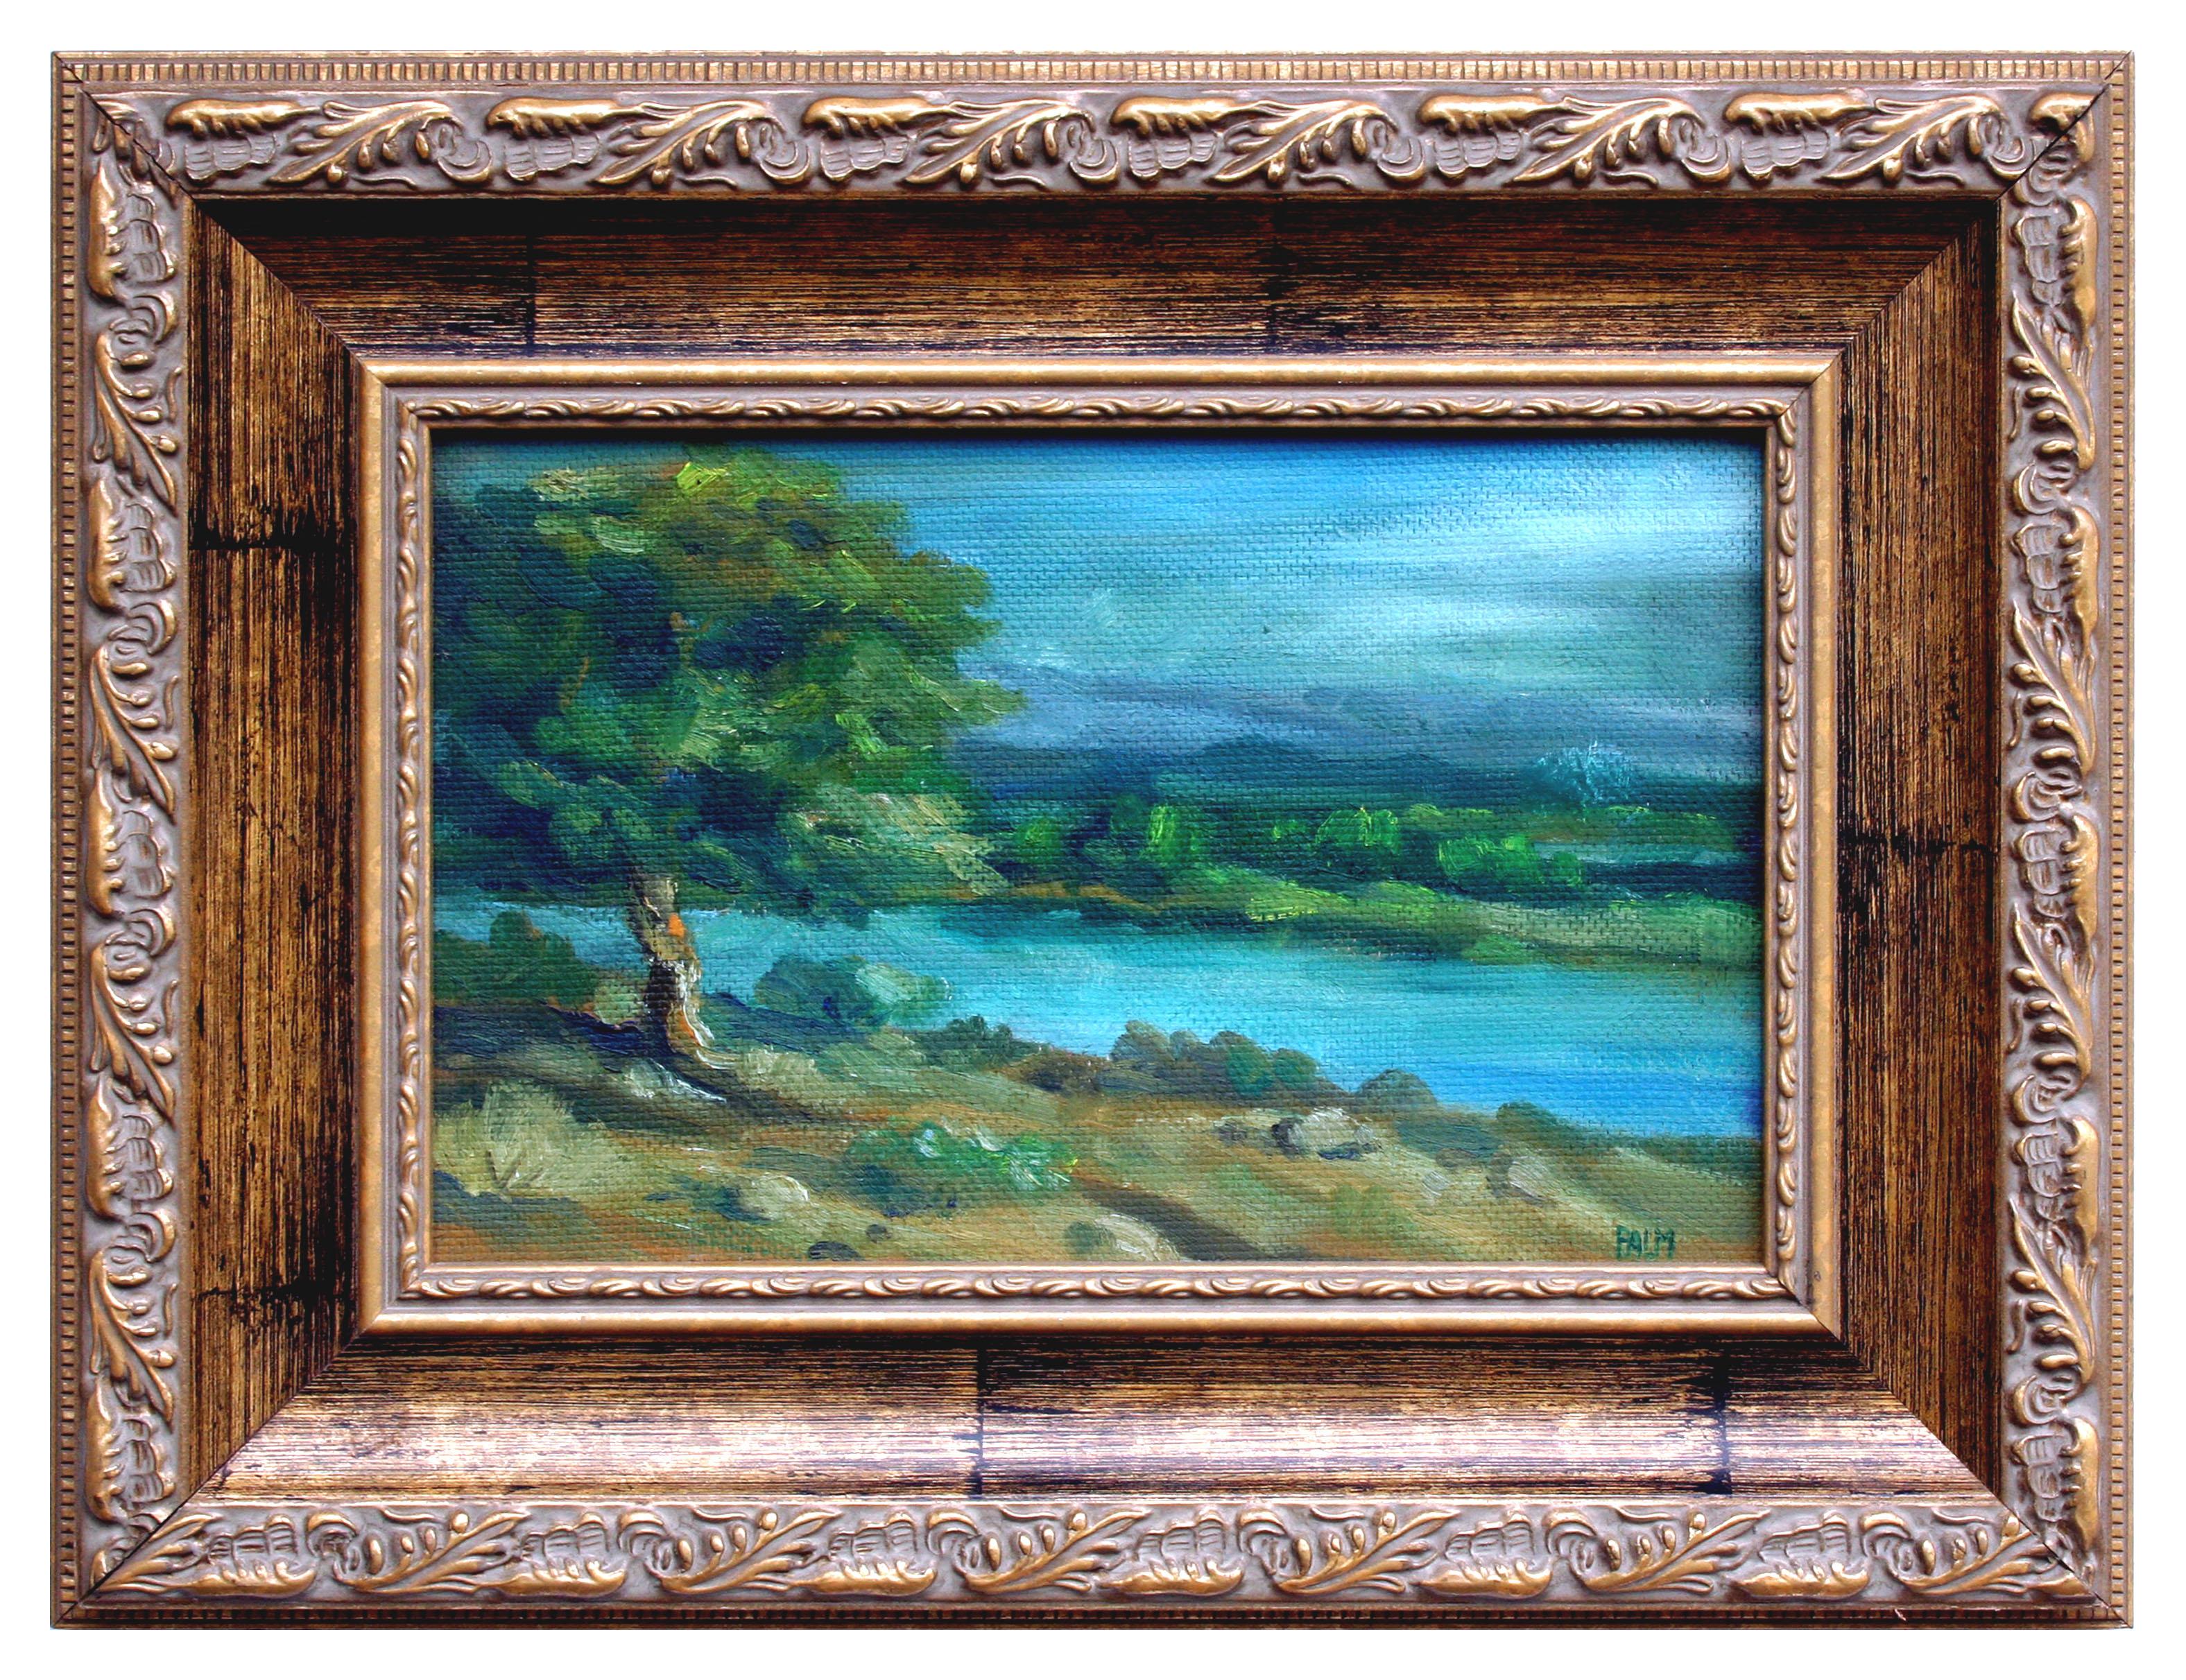 Pinto Lake, Mid Century Small-Scale Landscape with Lakeside Tree